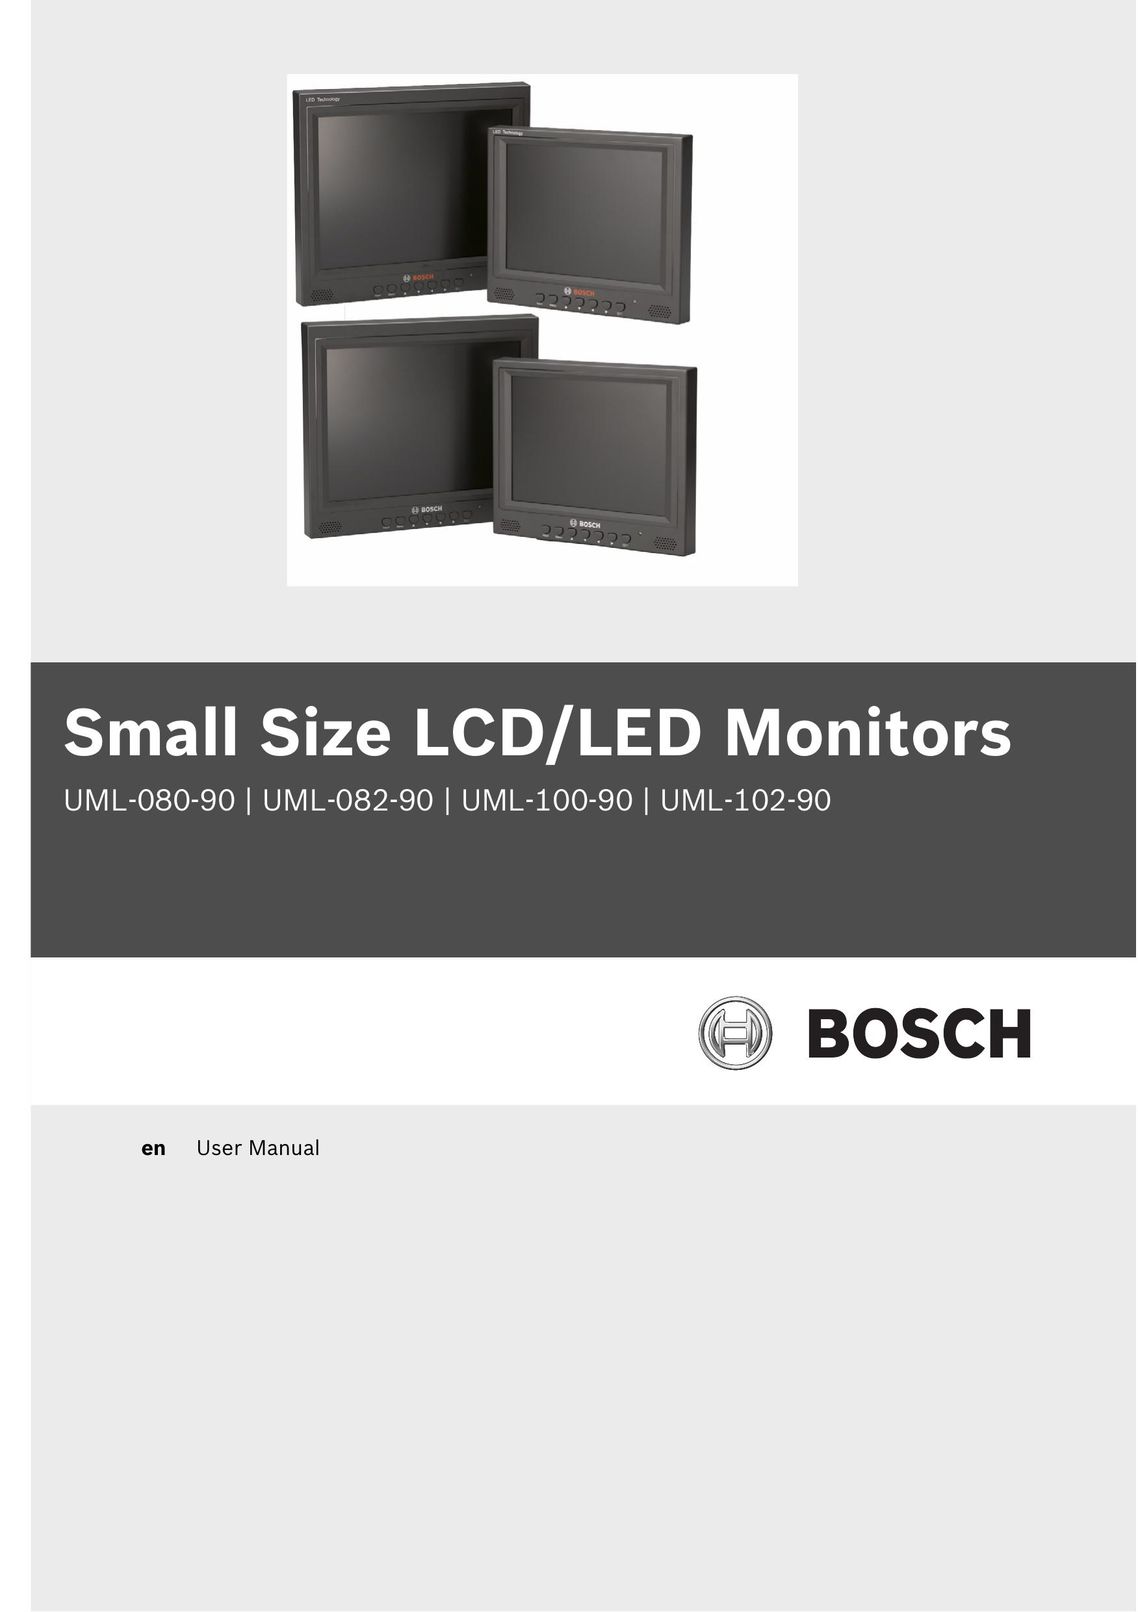 Bosch Appliances UML-080-90 Computer Monitor User Manual (Page 1)